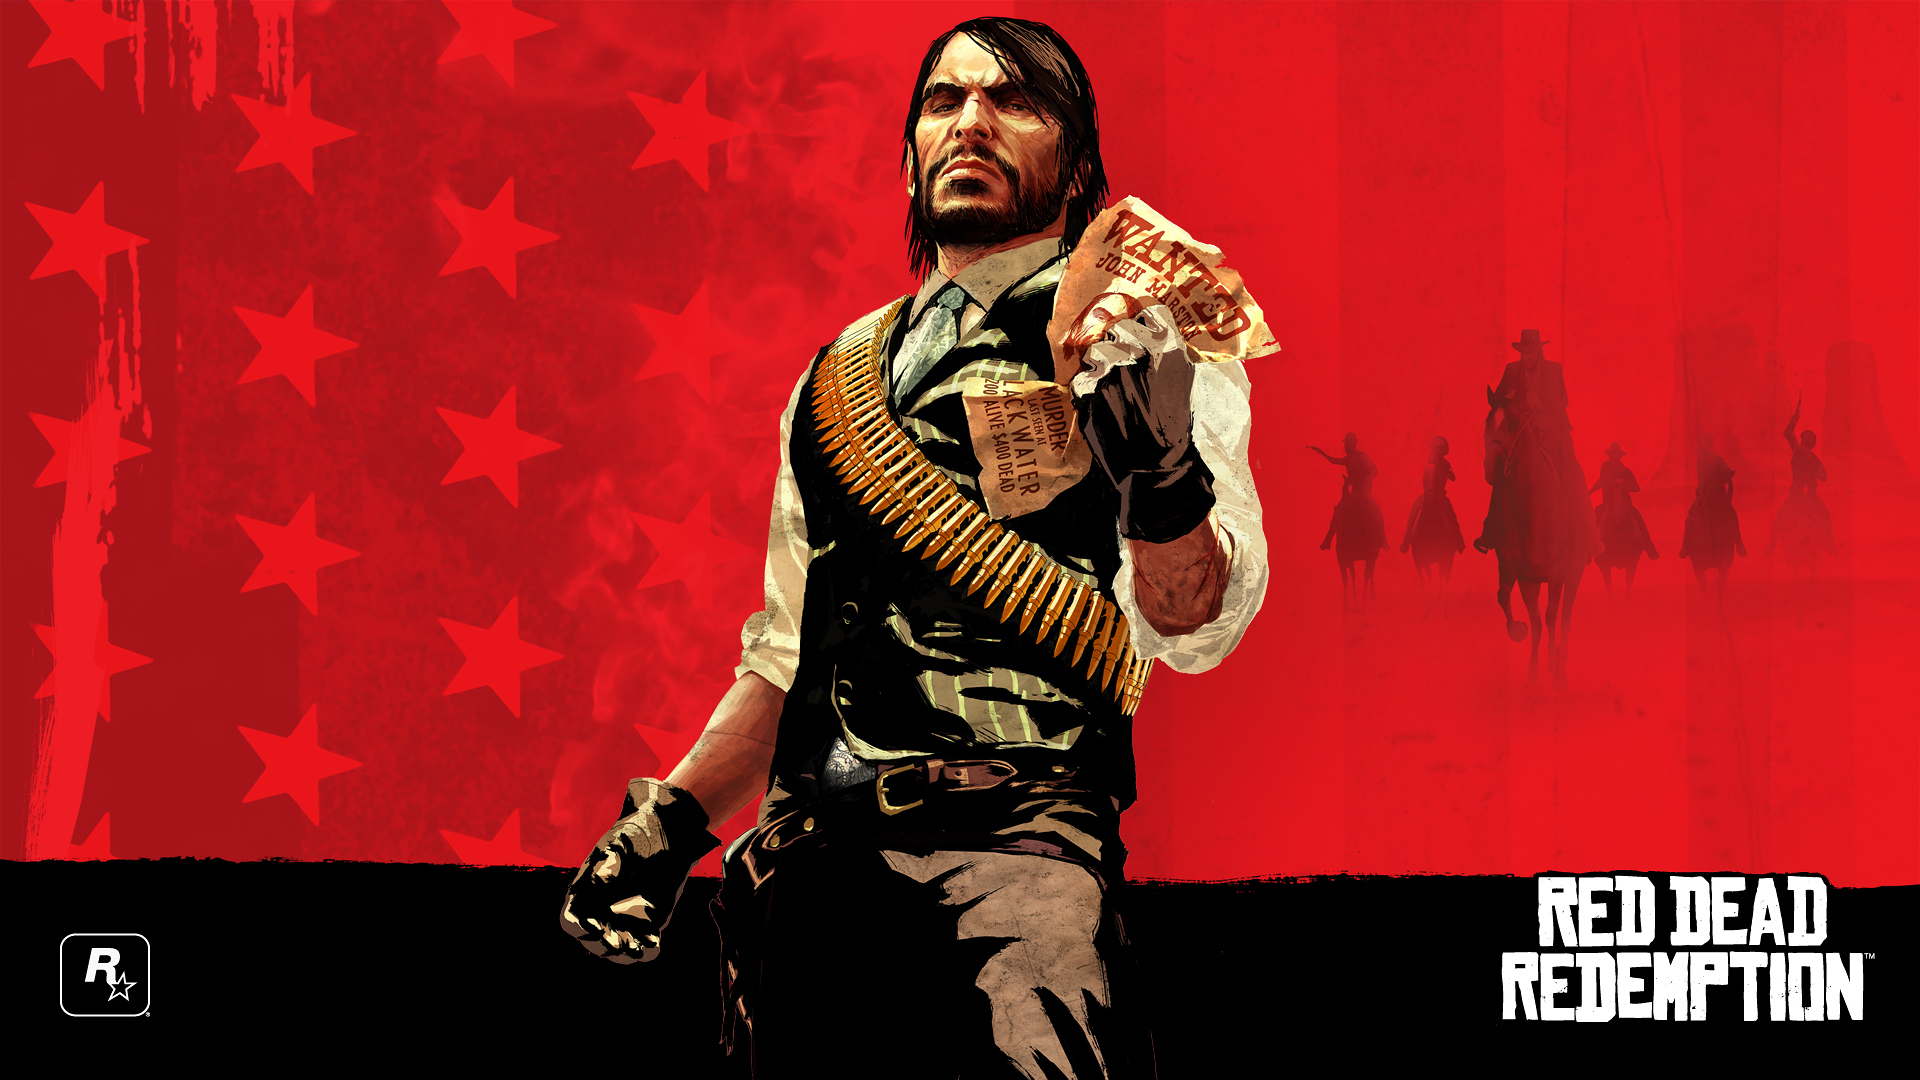 Red Dead Redemption Image John Marston Wanted HD Wallpaper And